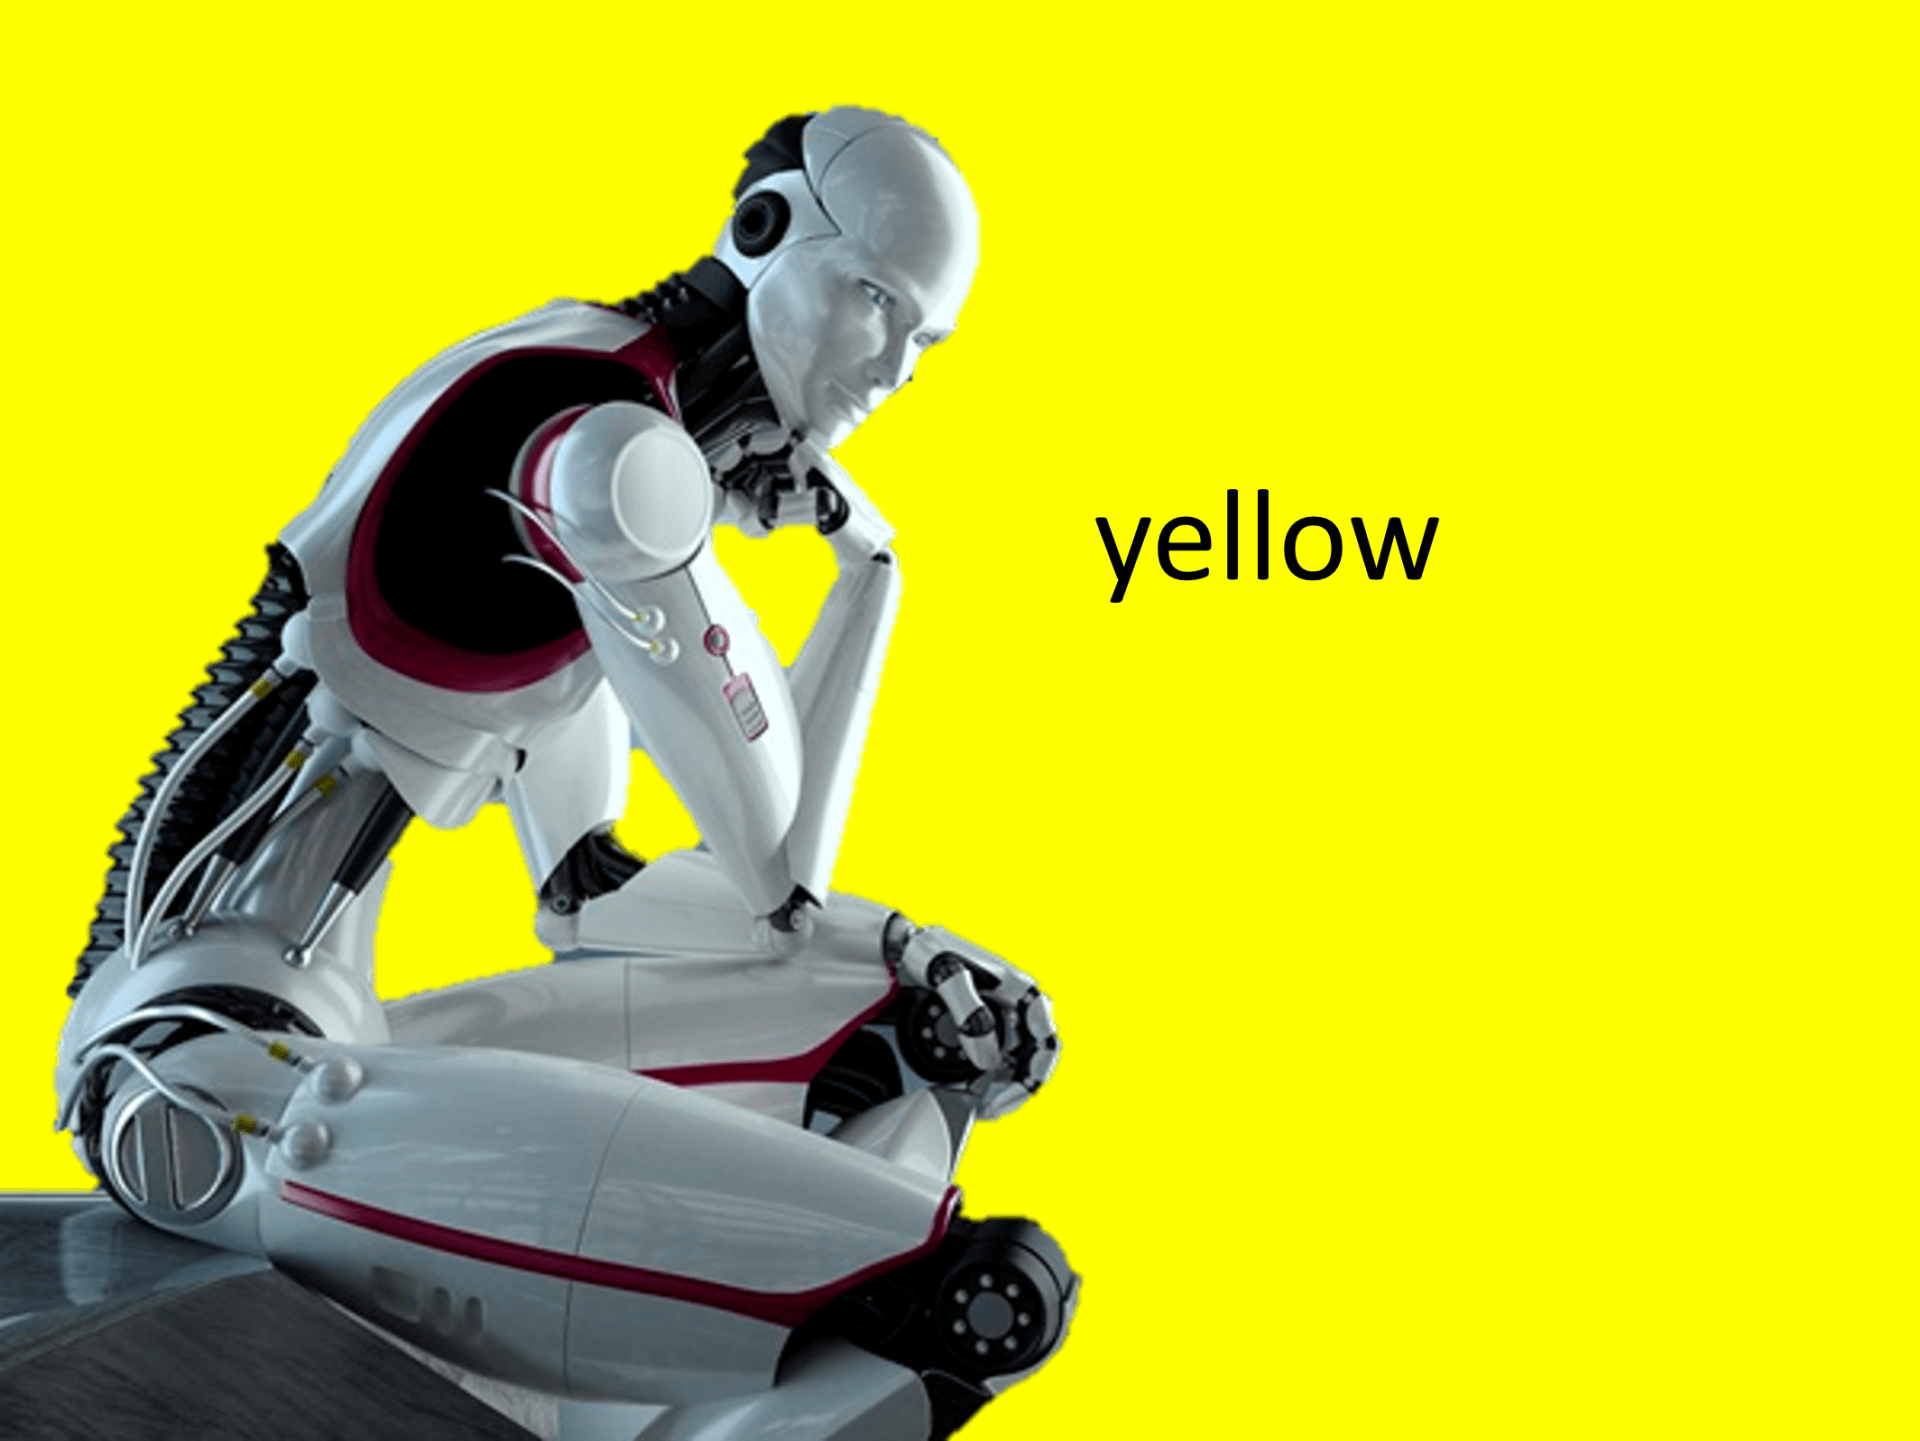 An A.I. Robot thinking about a Yellow Gallery